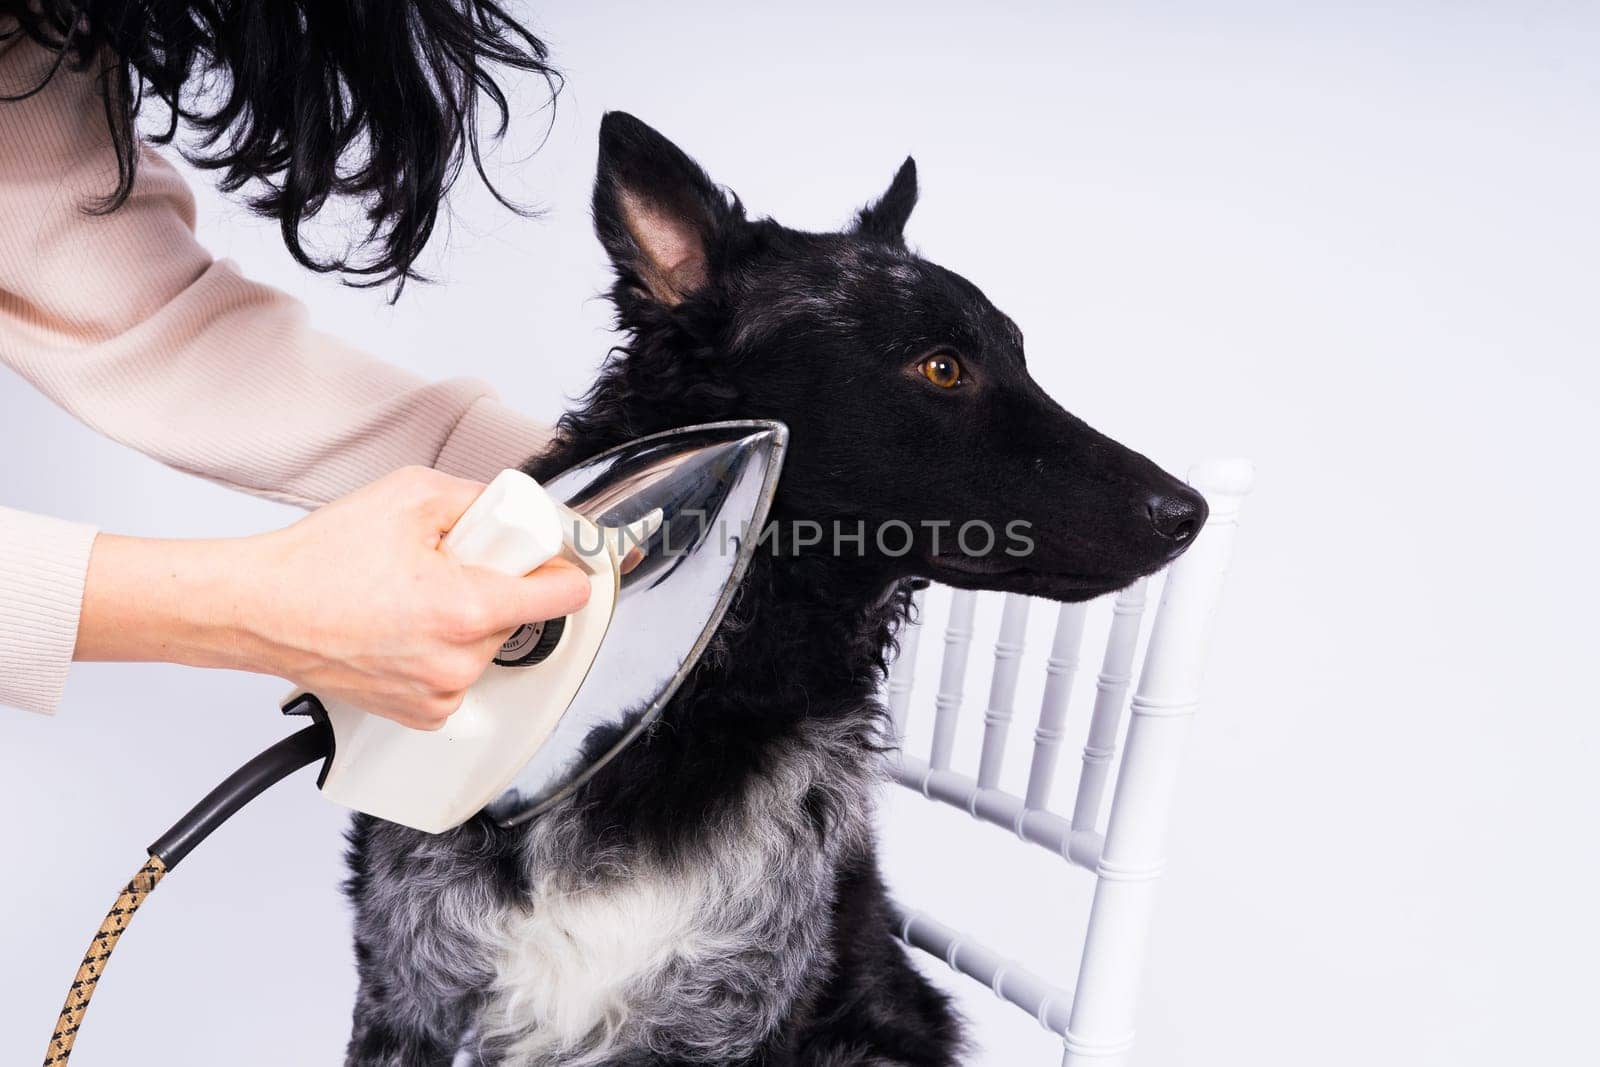 Mudi dog with electric iron on white background. The dog poses while doing housework.